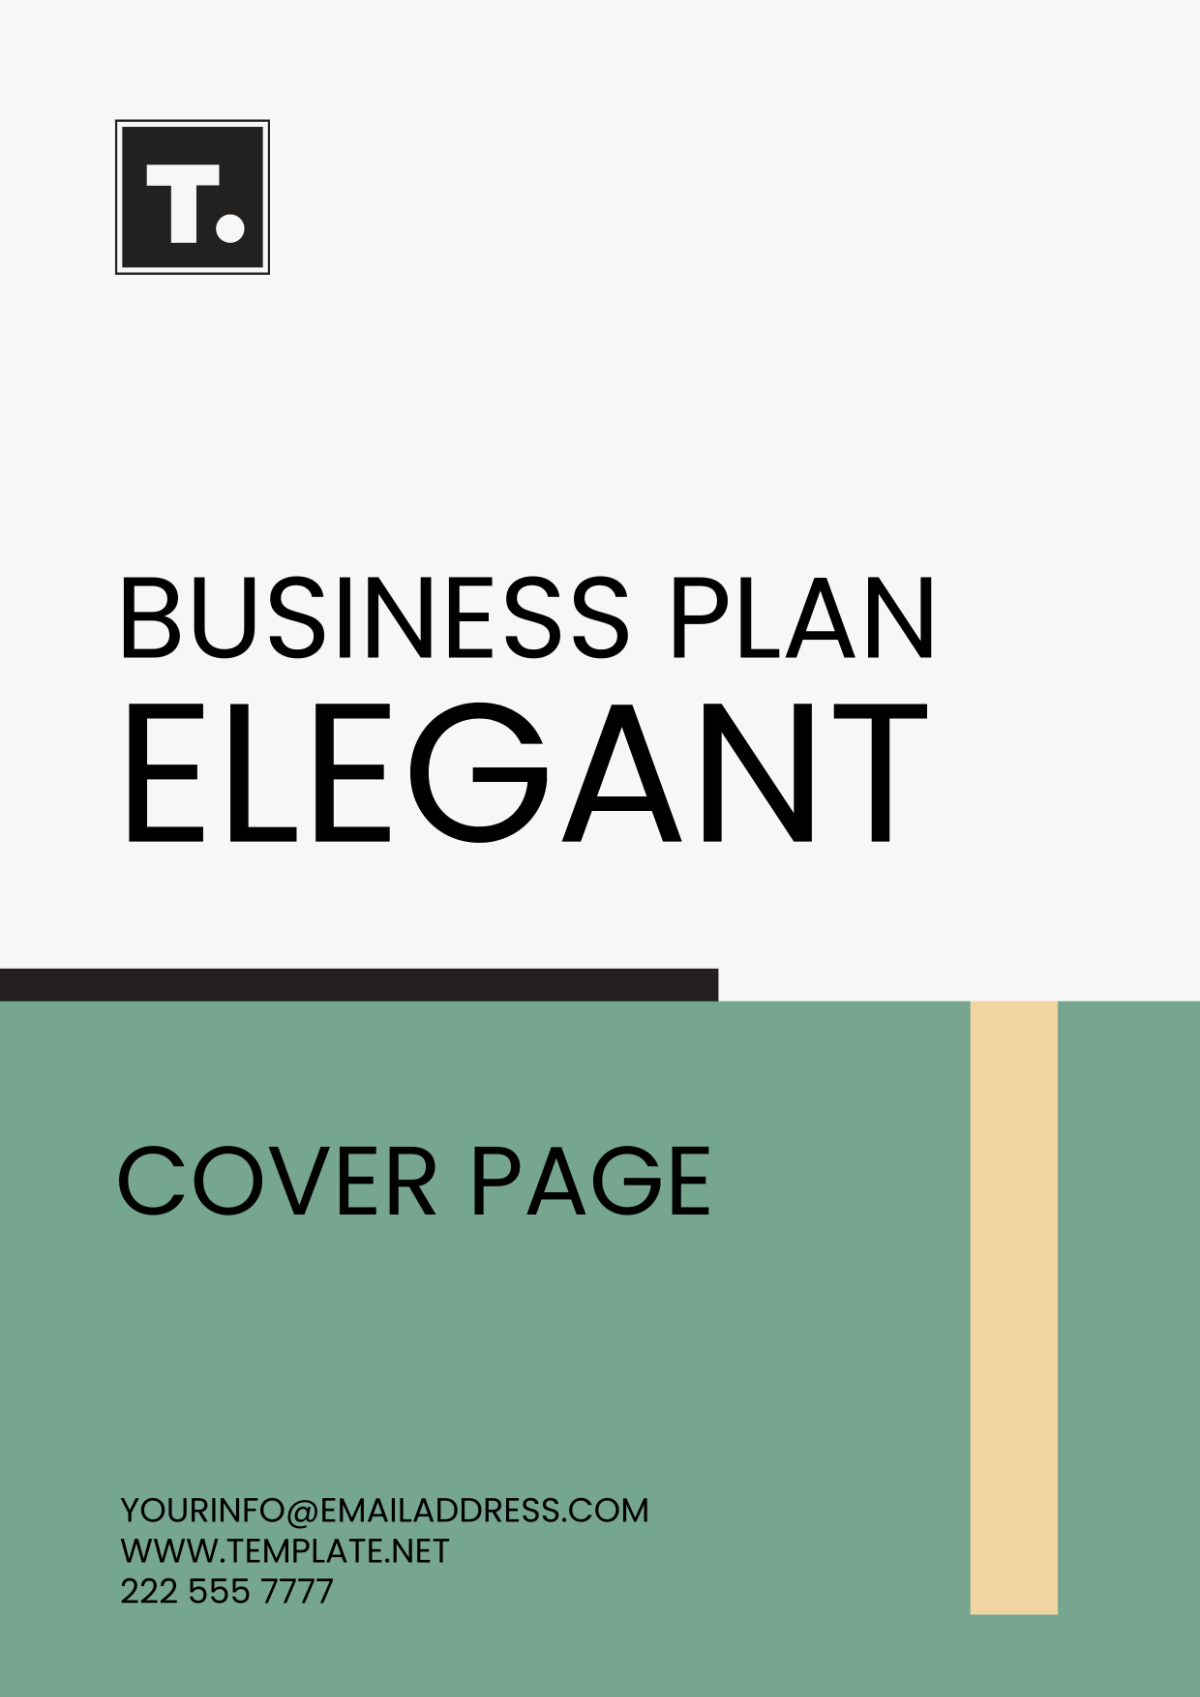 Business Plan Elegant Cover Page Template